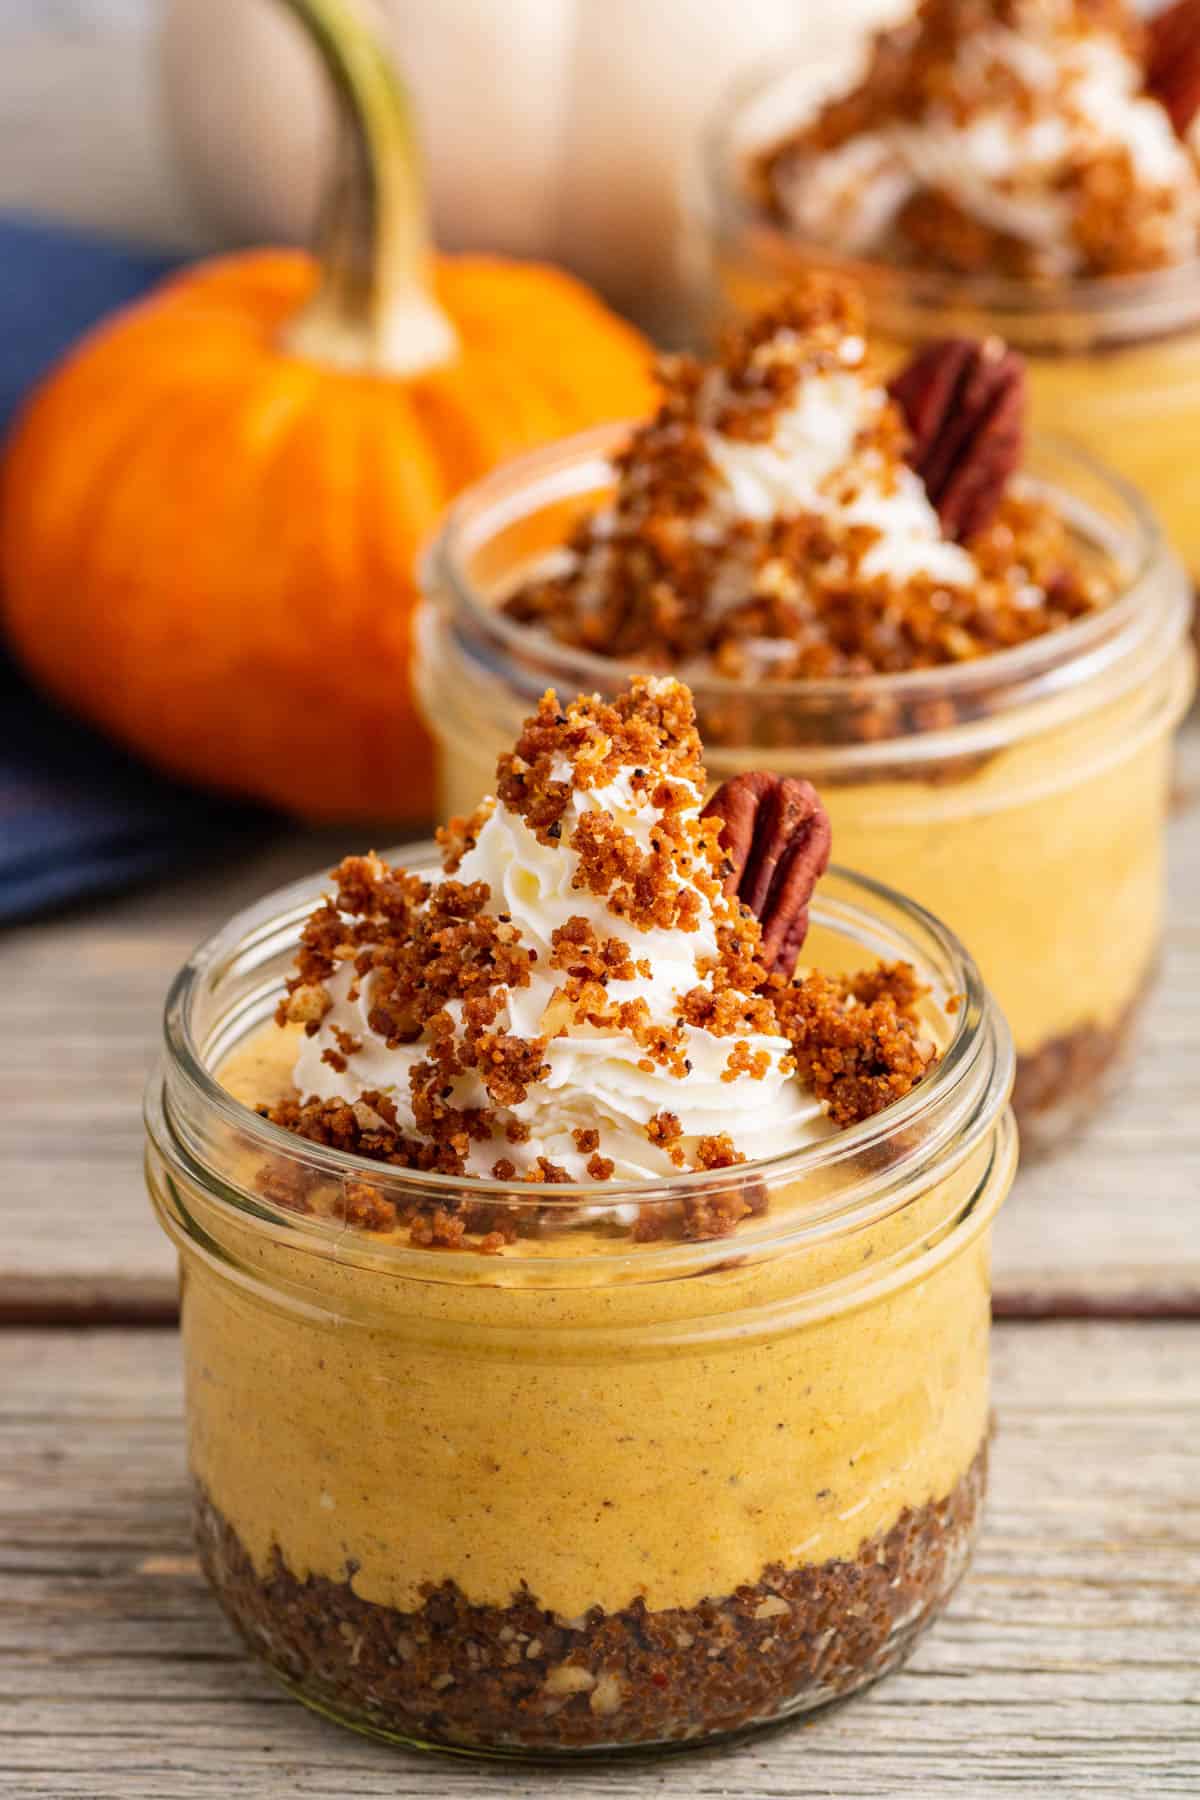 Pumpkin Delight with a Twist